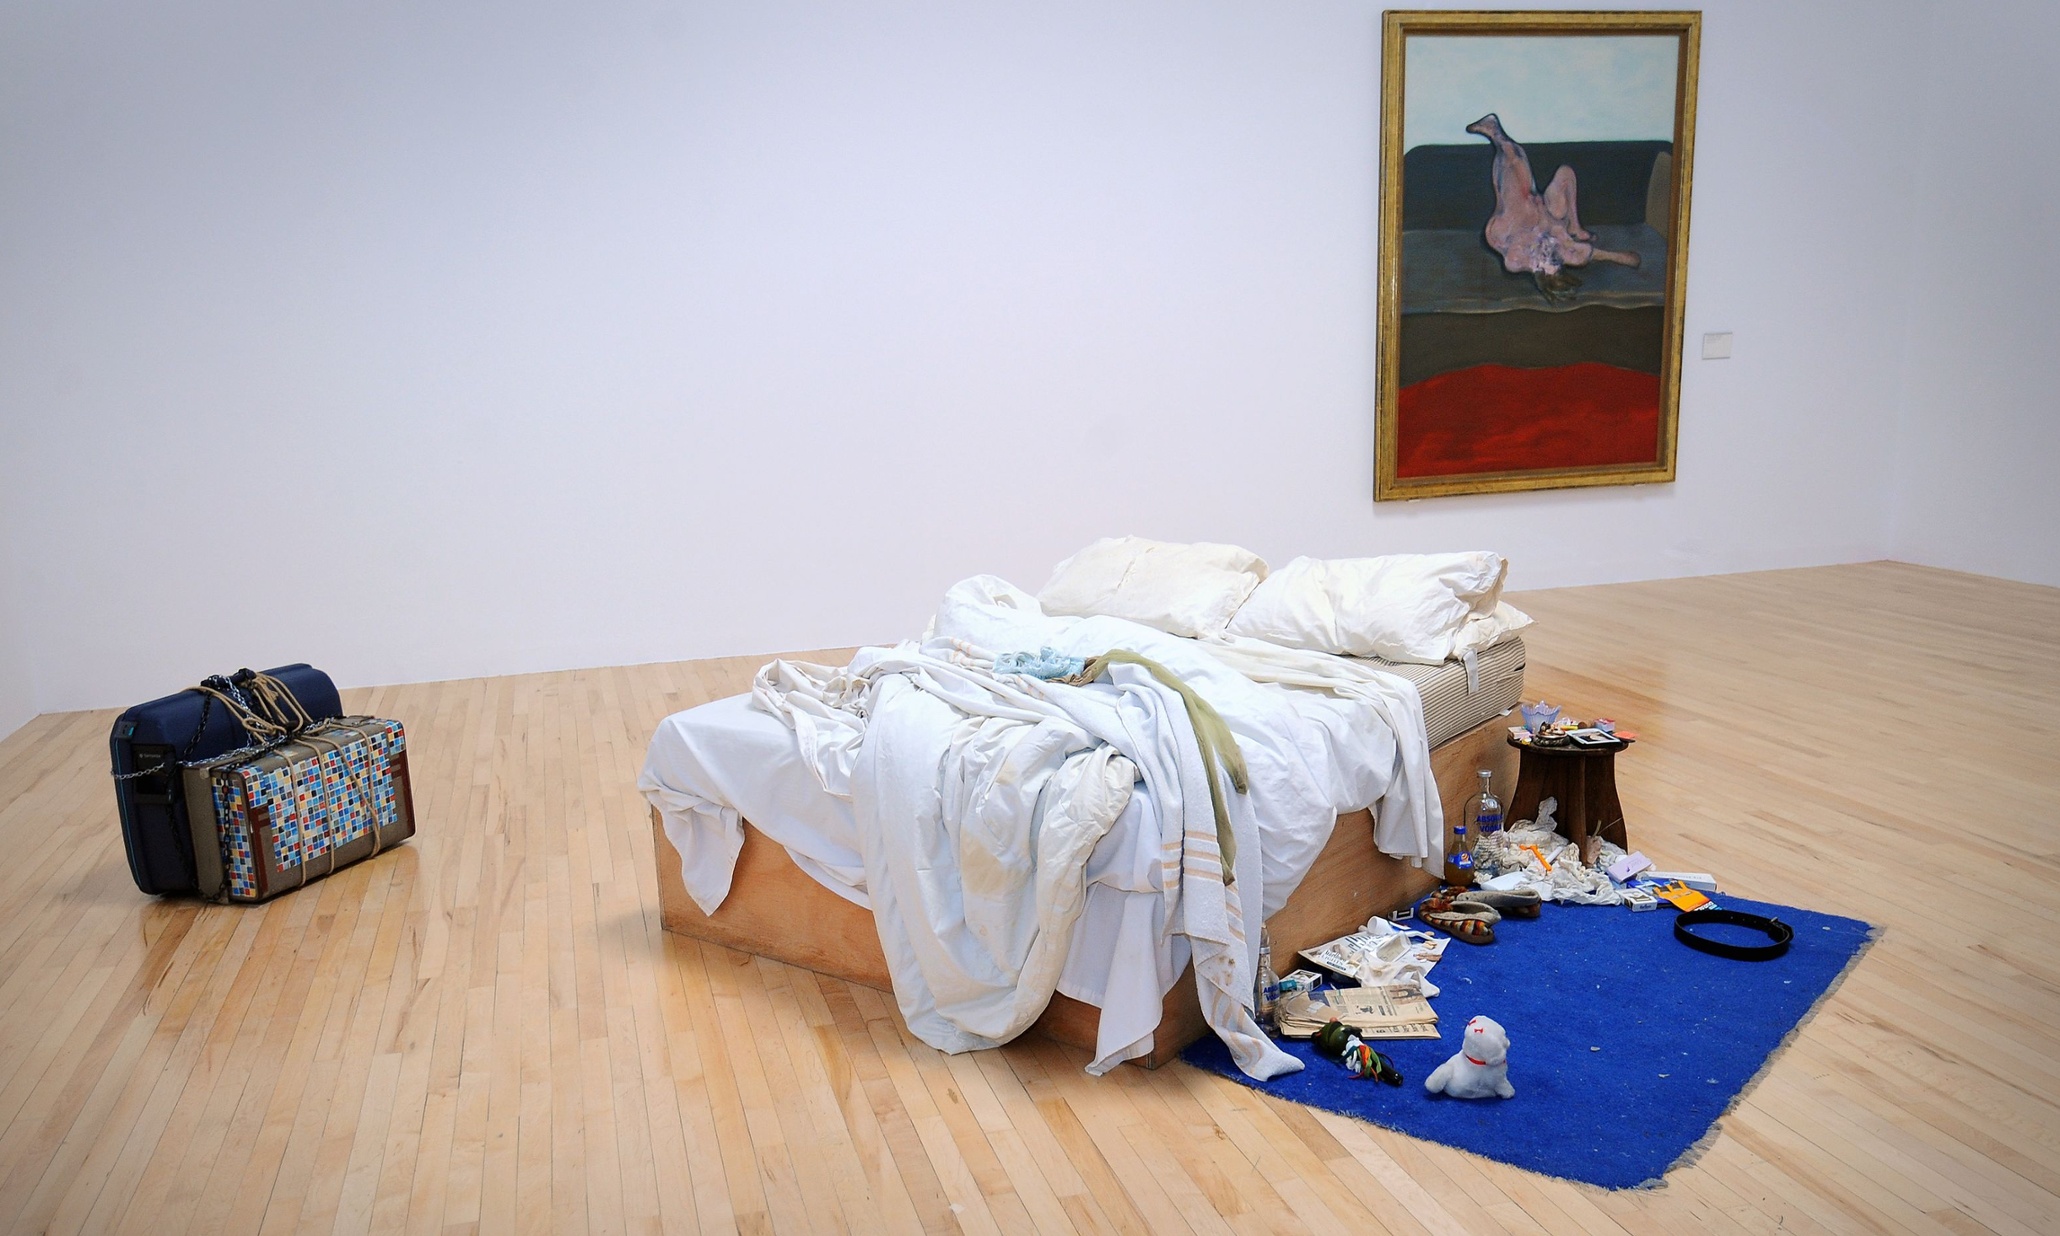 Tracey Emin S Messy Bed Goes On Display At Tate For First Time In 15 Years Art And Design